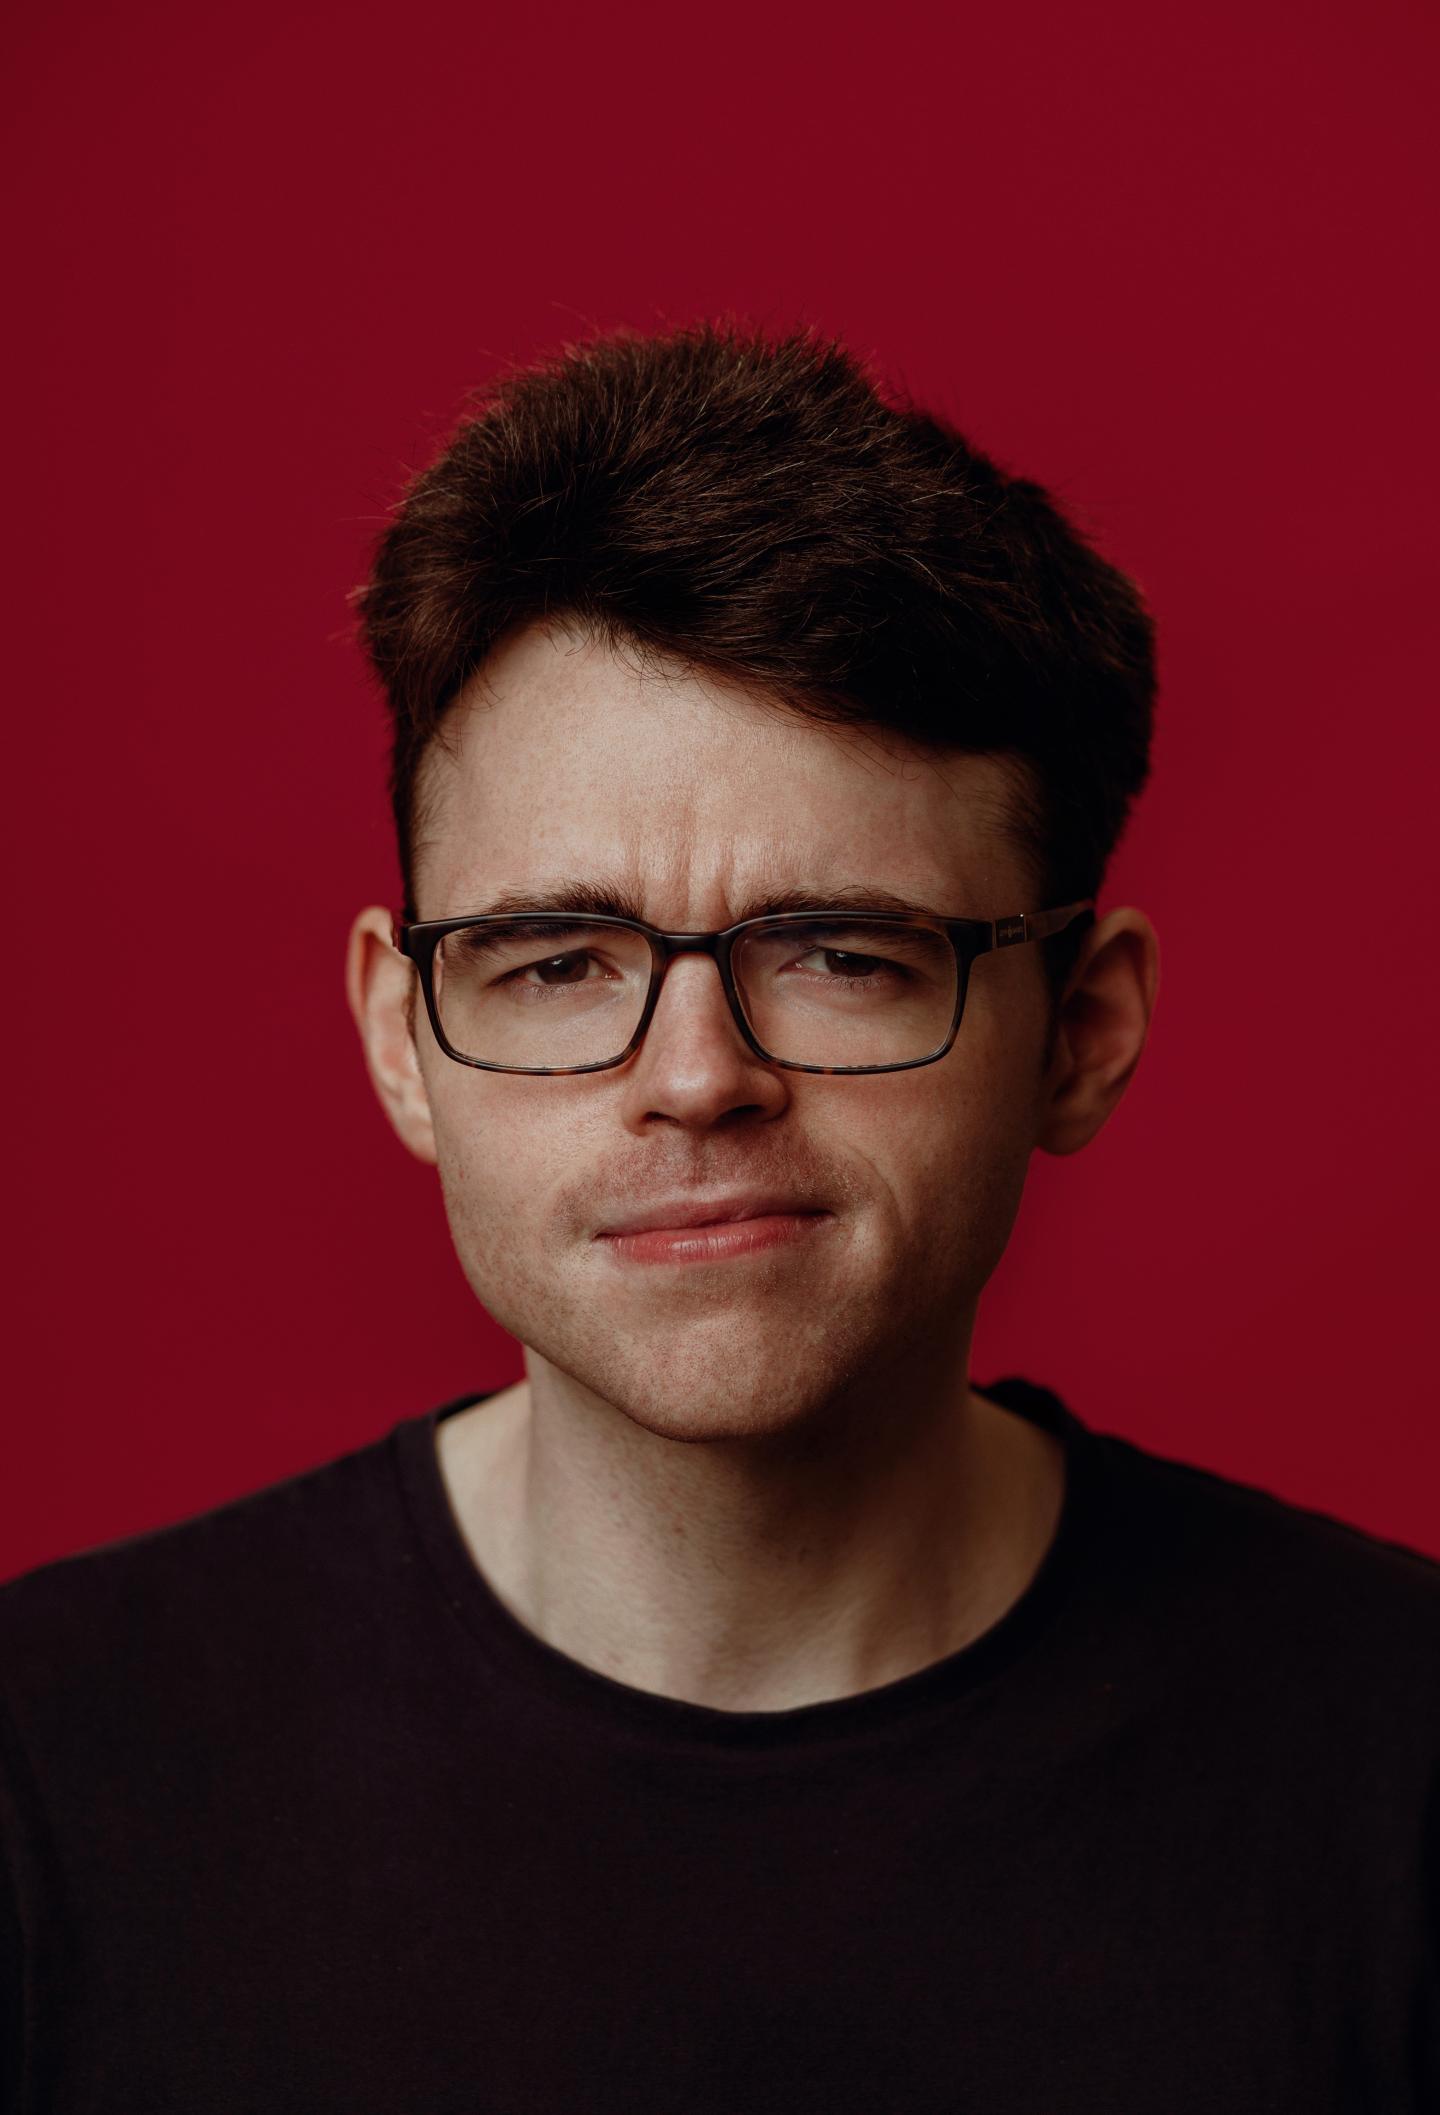 Image of comedian Roger O'Sullivan, against a red background wearing glasses with a side part in his hair